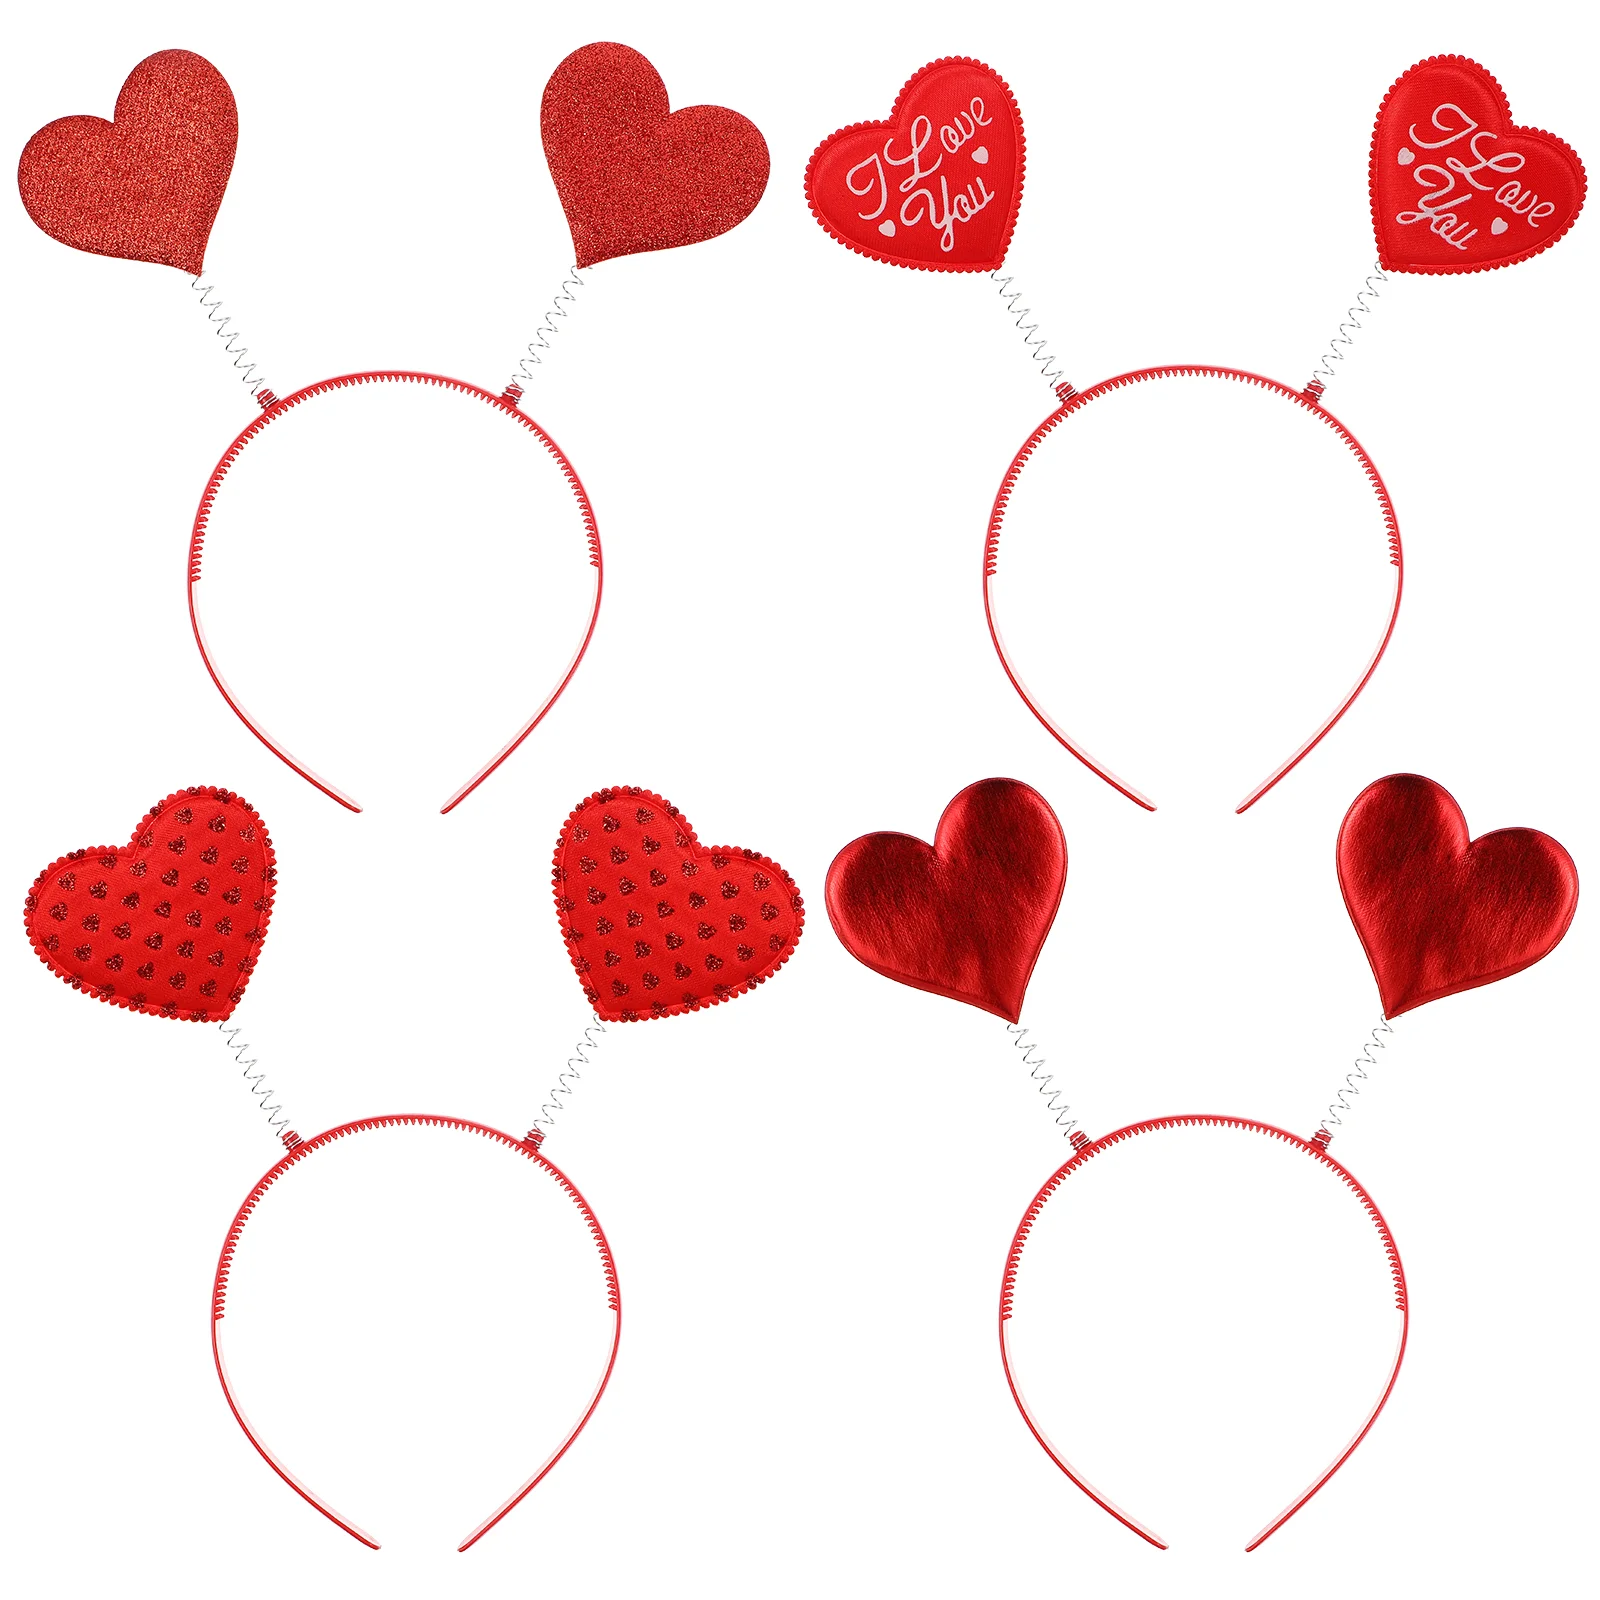 

Heart Headband Red Hair Head Bopper Sequin Cupid Valentines Glitter Accessories Day Boppers Headbands Party Valentine Band Love